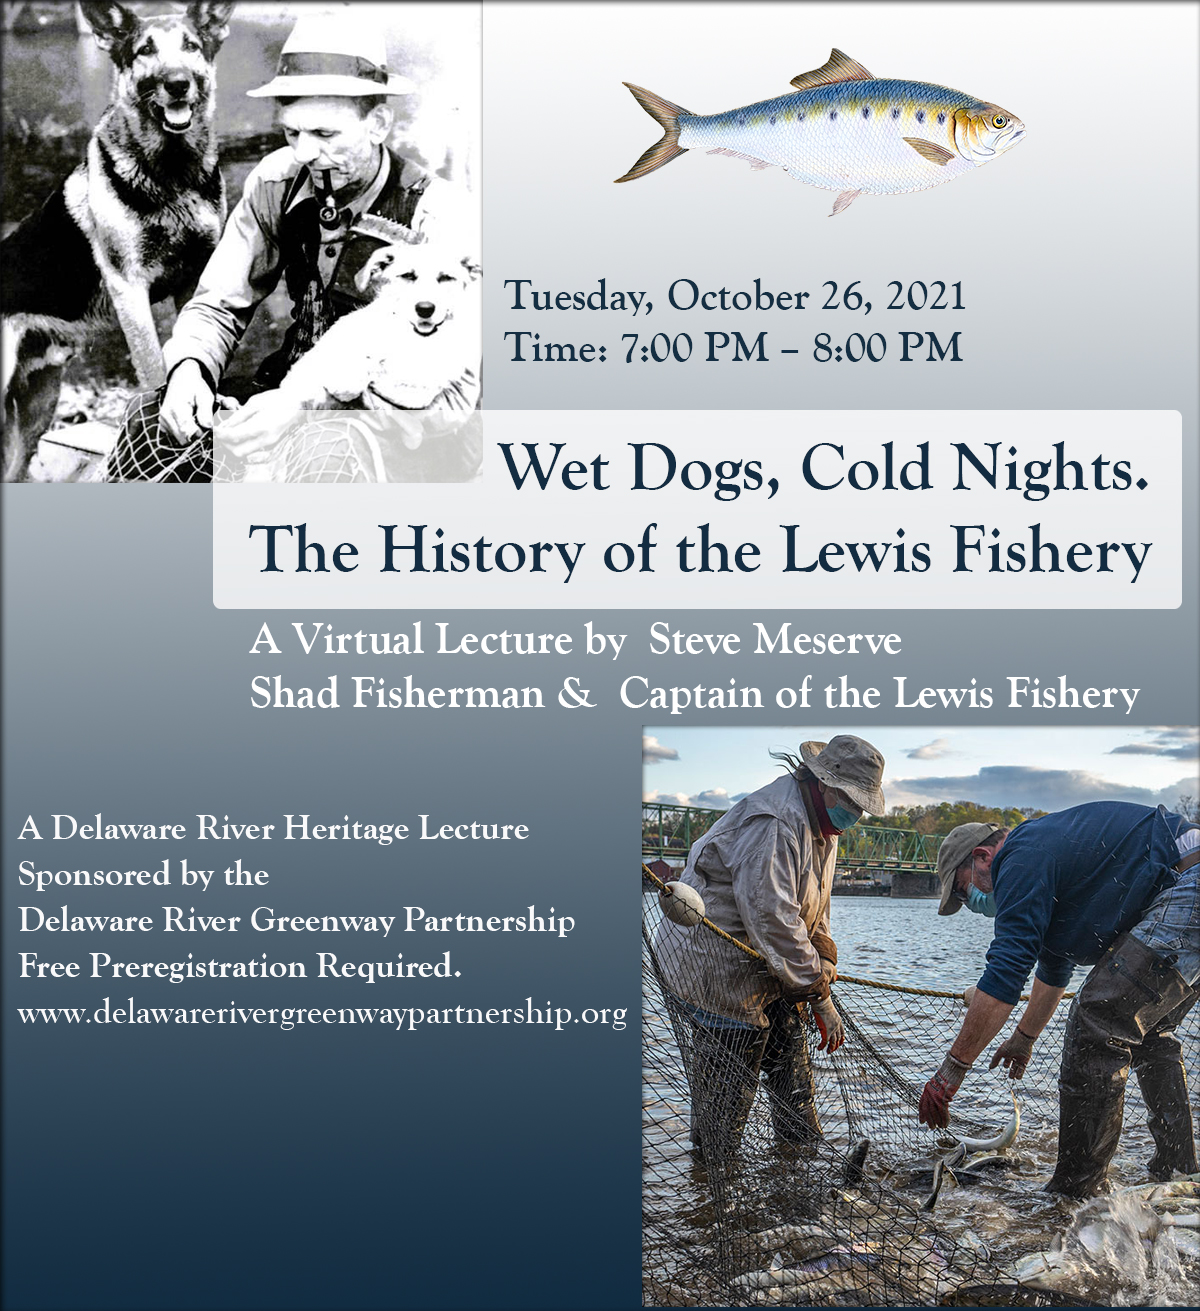 Wet Dogs, Cold Nights. The History of the Lewis Fishery